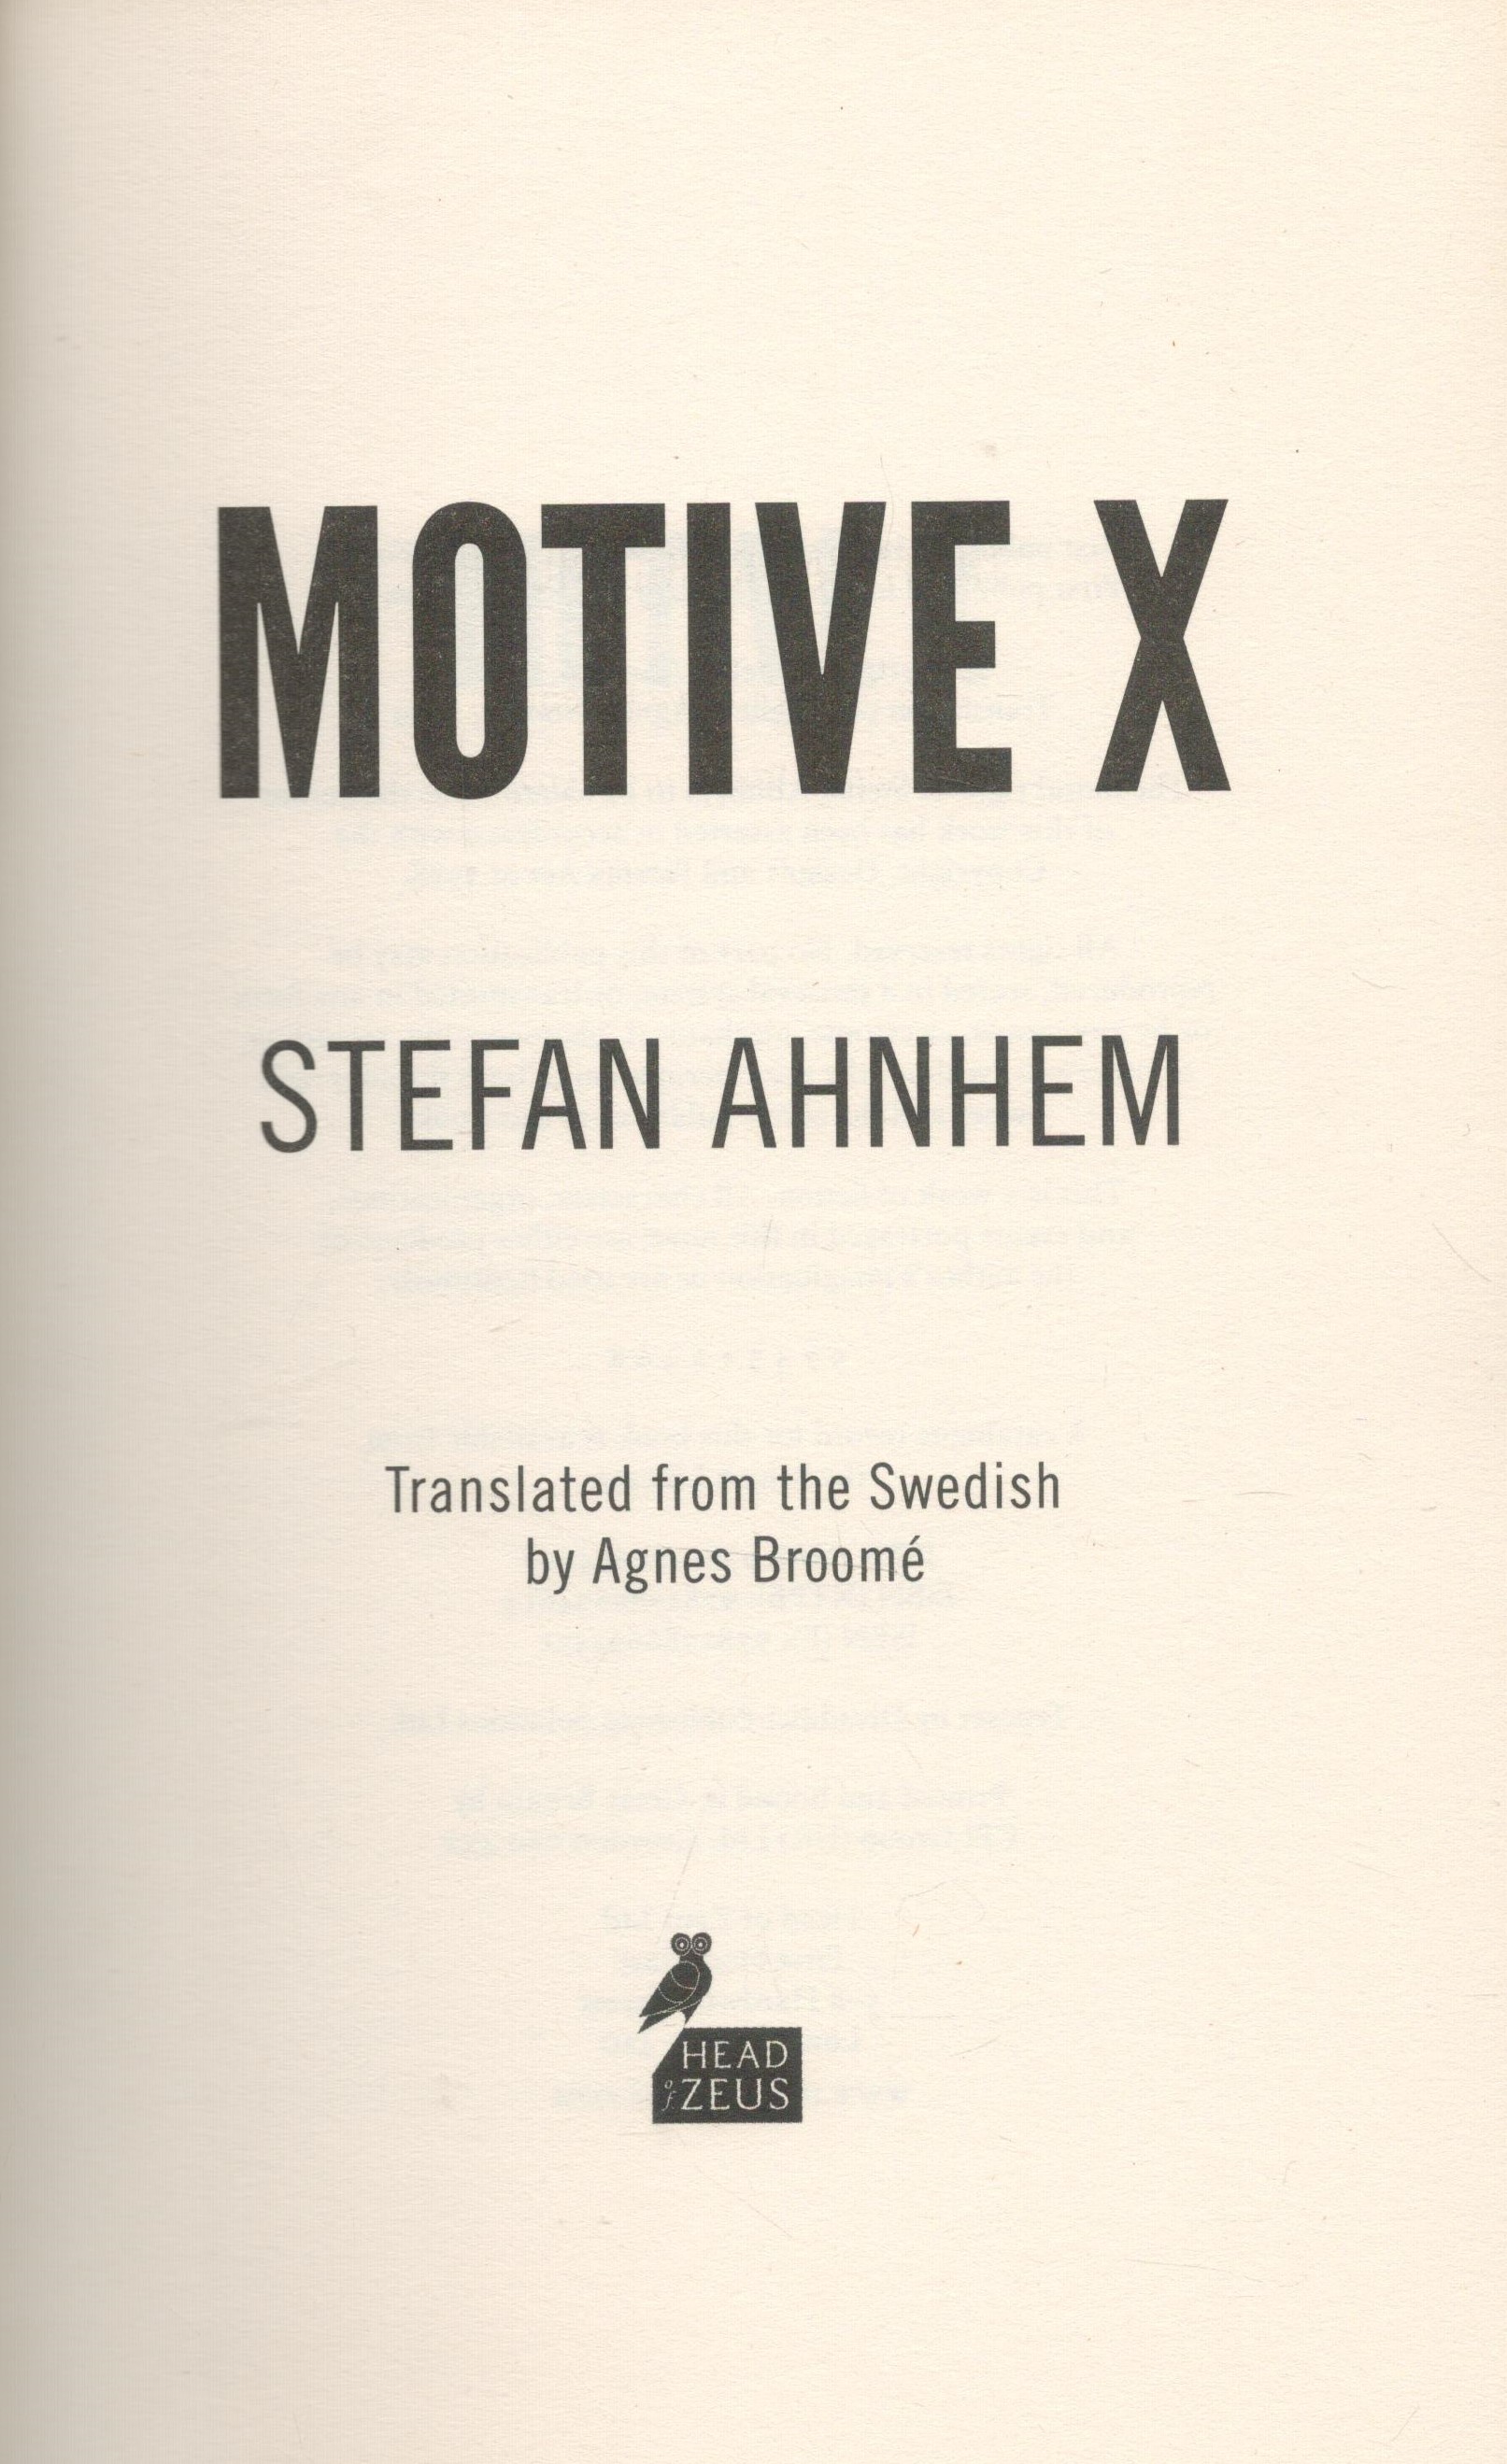 Motive X by Stefan Ahnhem 2019 First UK Edition Hardback book with 554 pages published by Head Of - Image 2 of 3